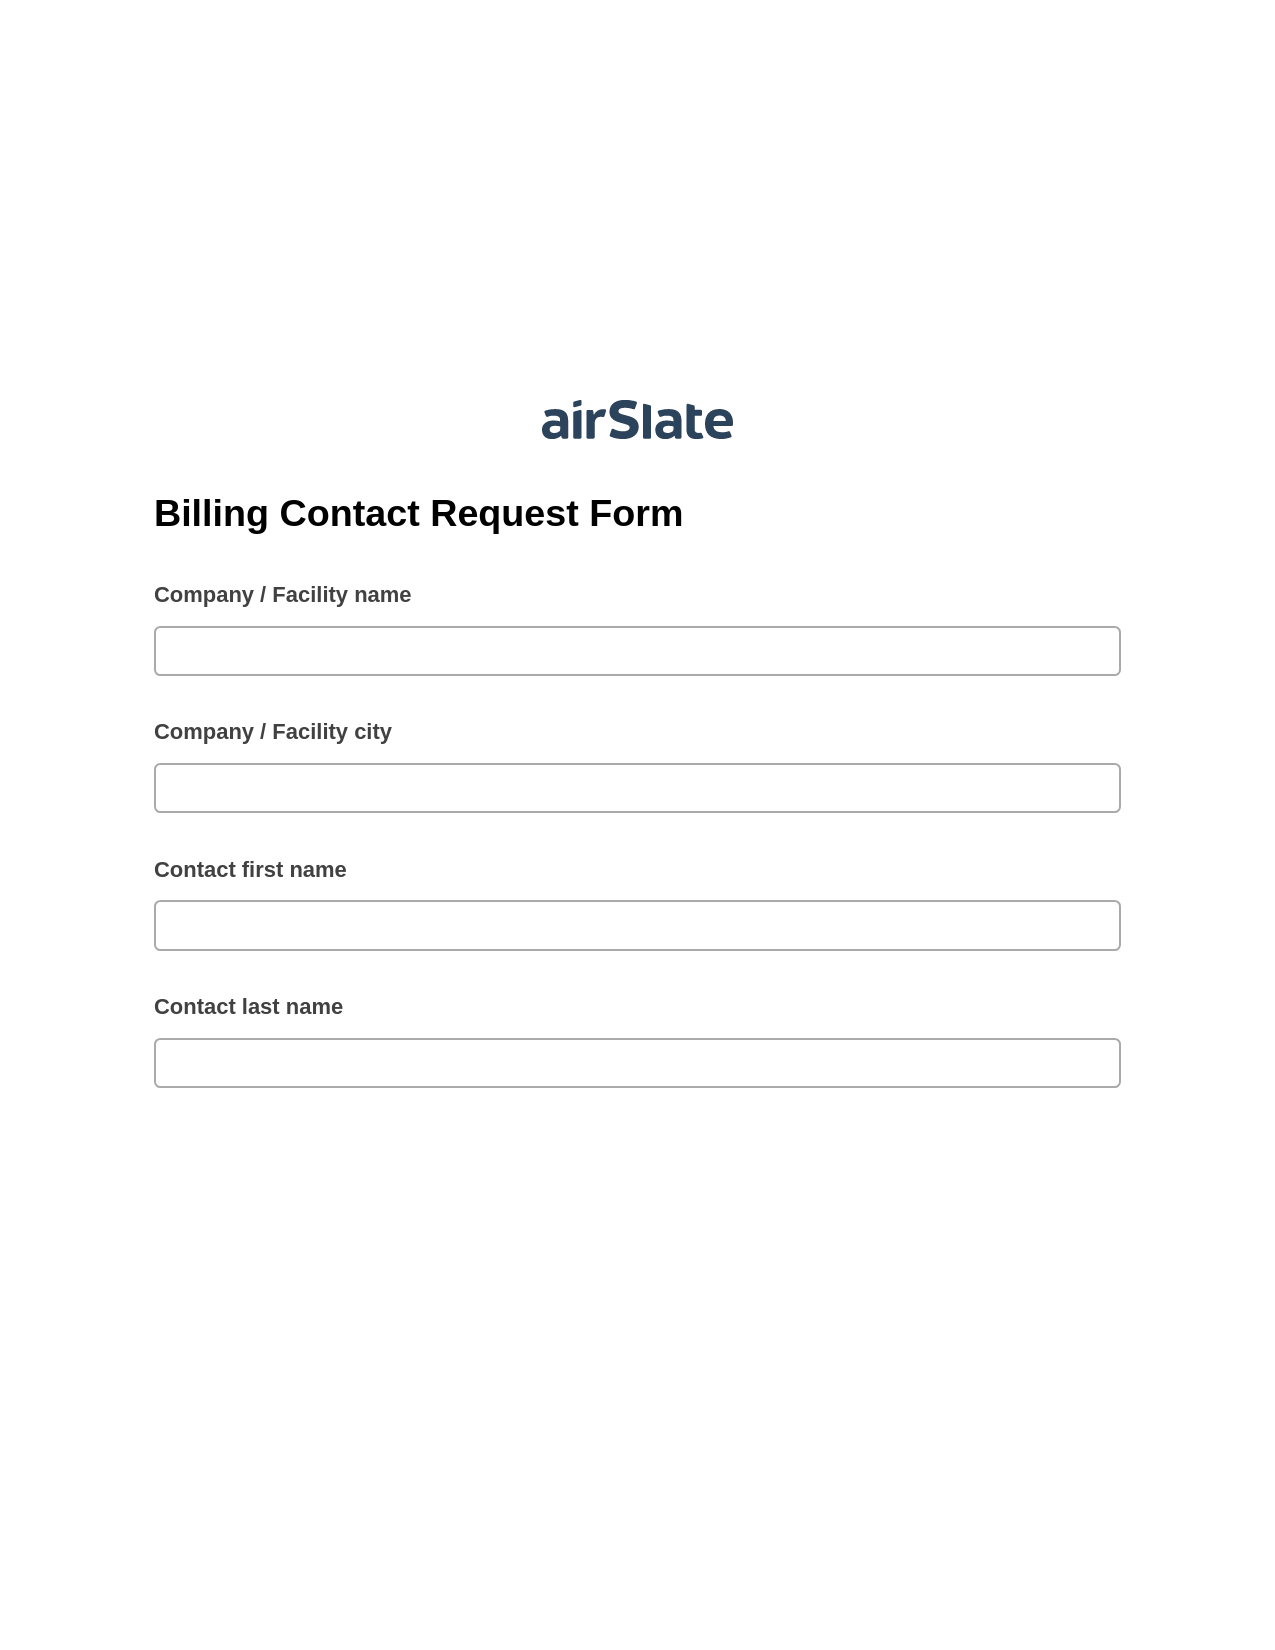 Billing Contact Request Form Pre-fill from CSV File Bot, Update NetSuite Records Bot, Export to Formstack Documents Bot